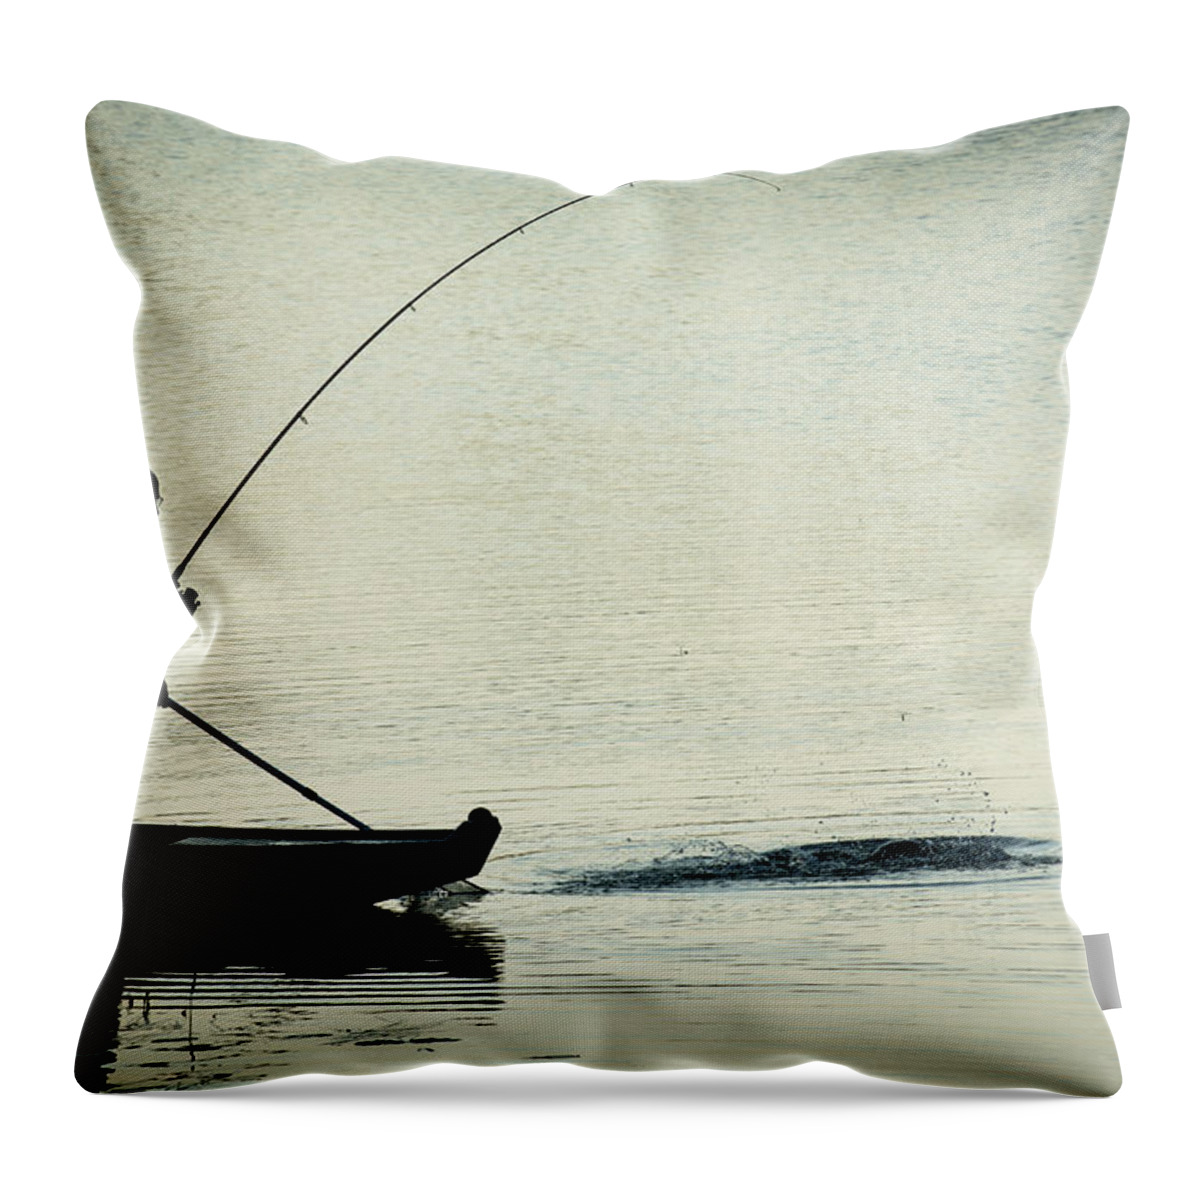 Fisher Throw Pillow featuring the photograph Fisherman Catching Fish On A Twilight Lake by Andreas Berthold